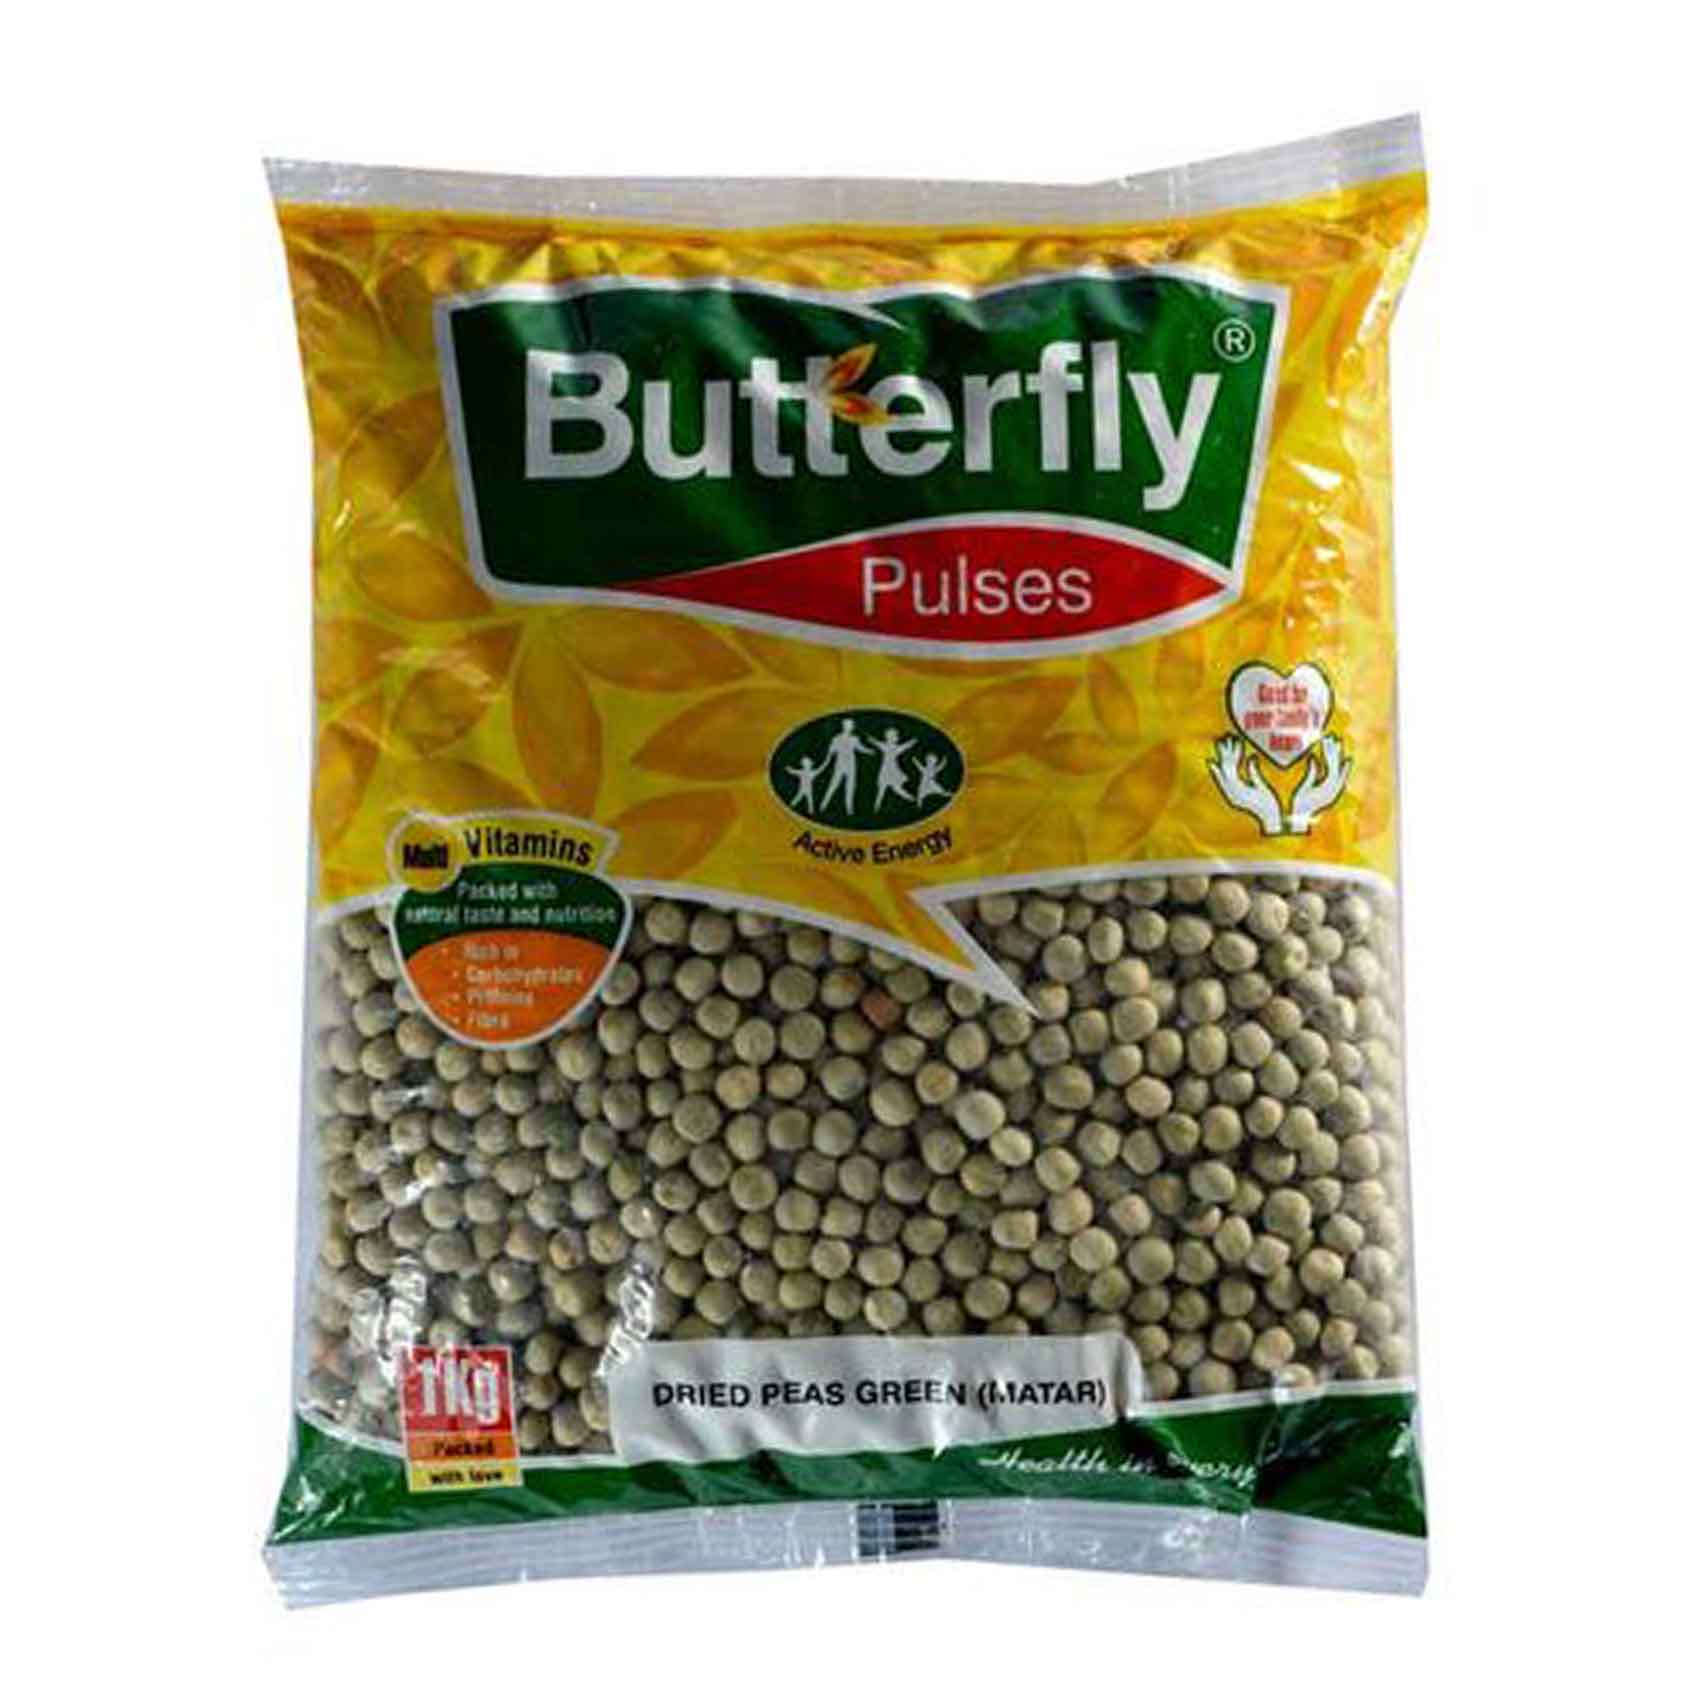 Butterfly Pulses Dried Green Peas 1Kg